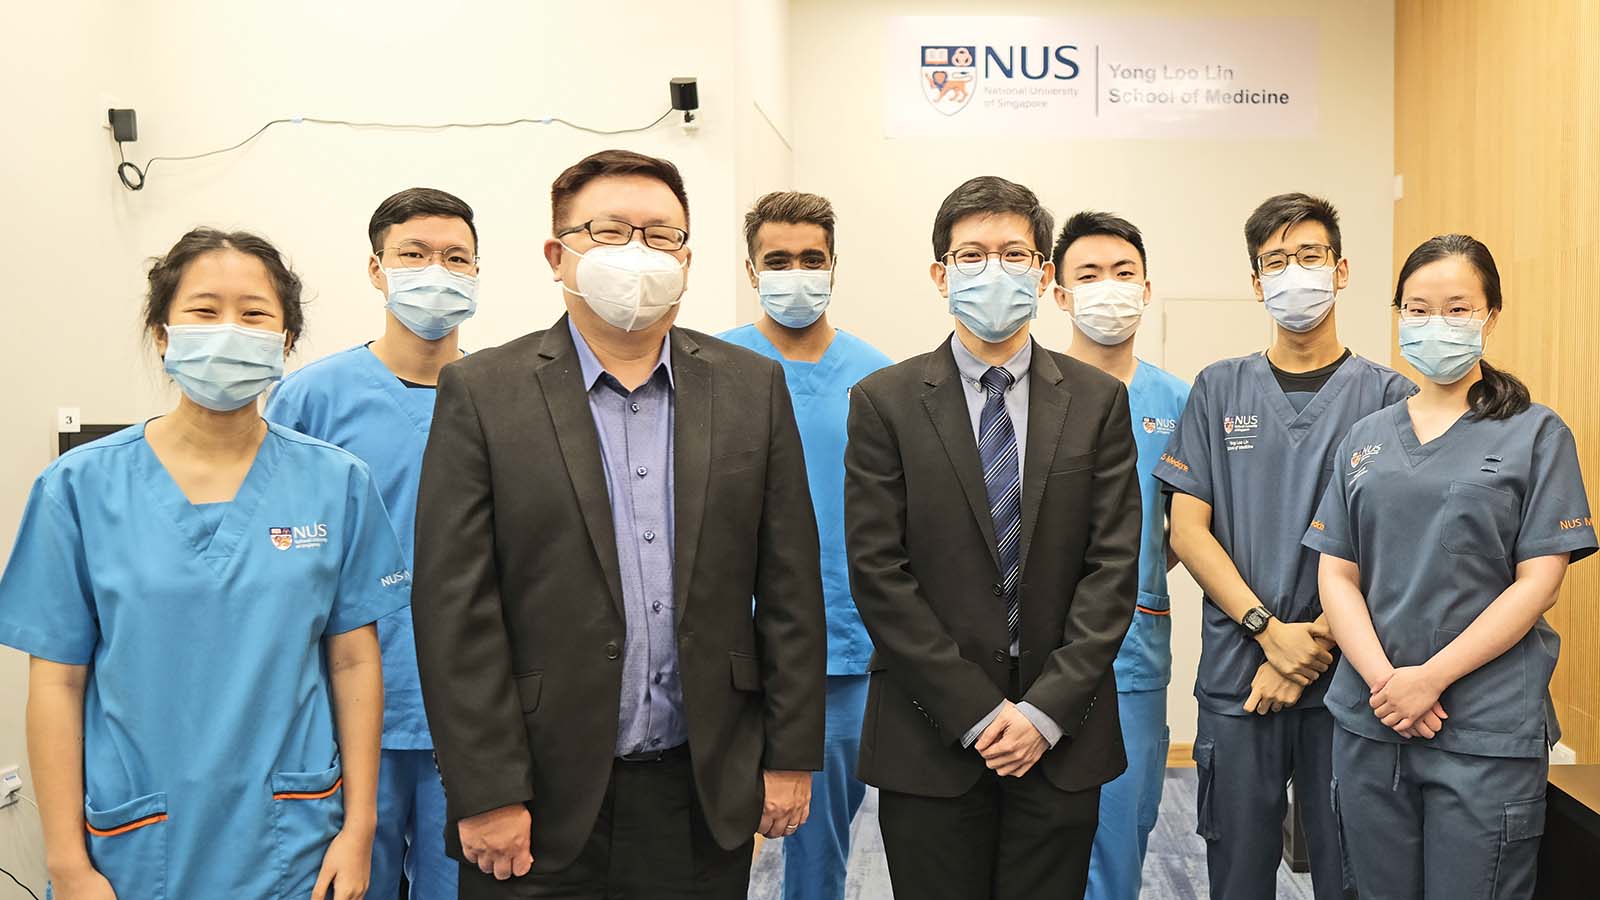 Assistant Professor Shawn Goh (second from left), Assistant Professor Cyrus Ho (third from left), as well as NUS Medicine and Nursing students.